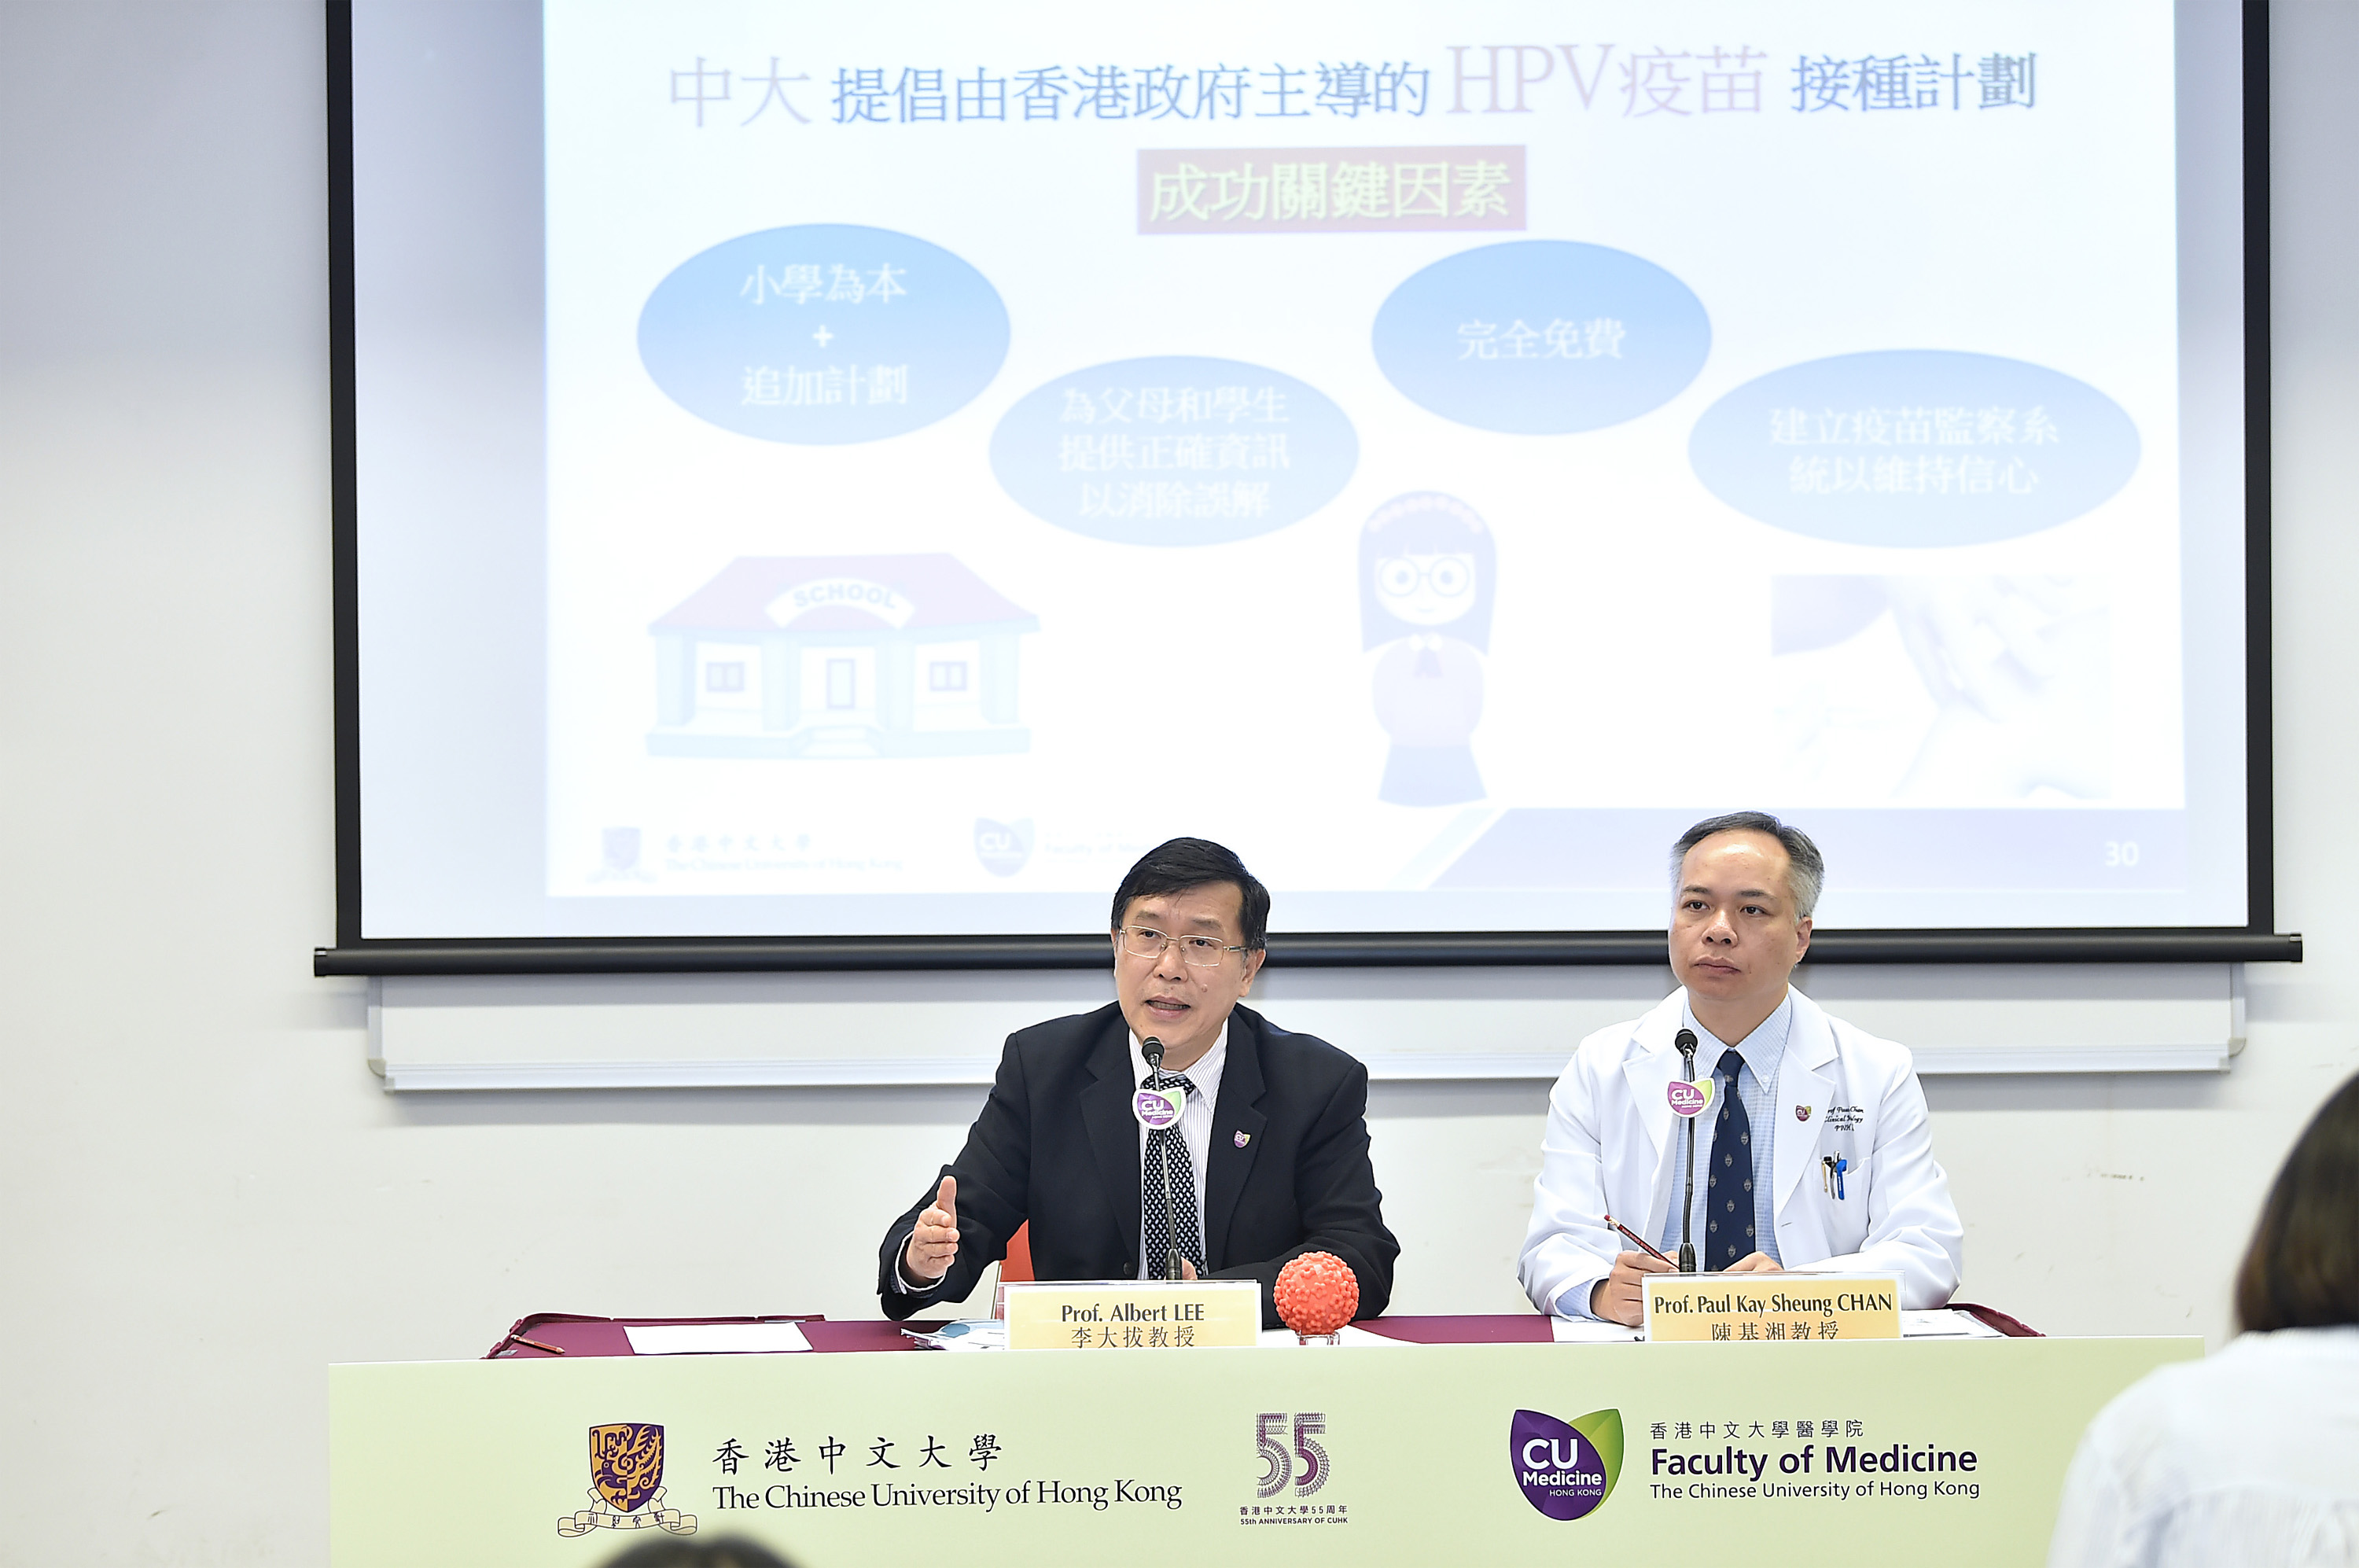 Professor Albert LEE (left) explains parent’s insufficient knowledge in HPV and cervical cancer is the main cause of low vaccine uptake in Hong Kong. Thus, he recommends strengthening health education in this aspect.